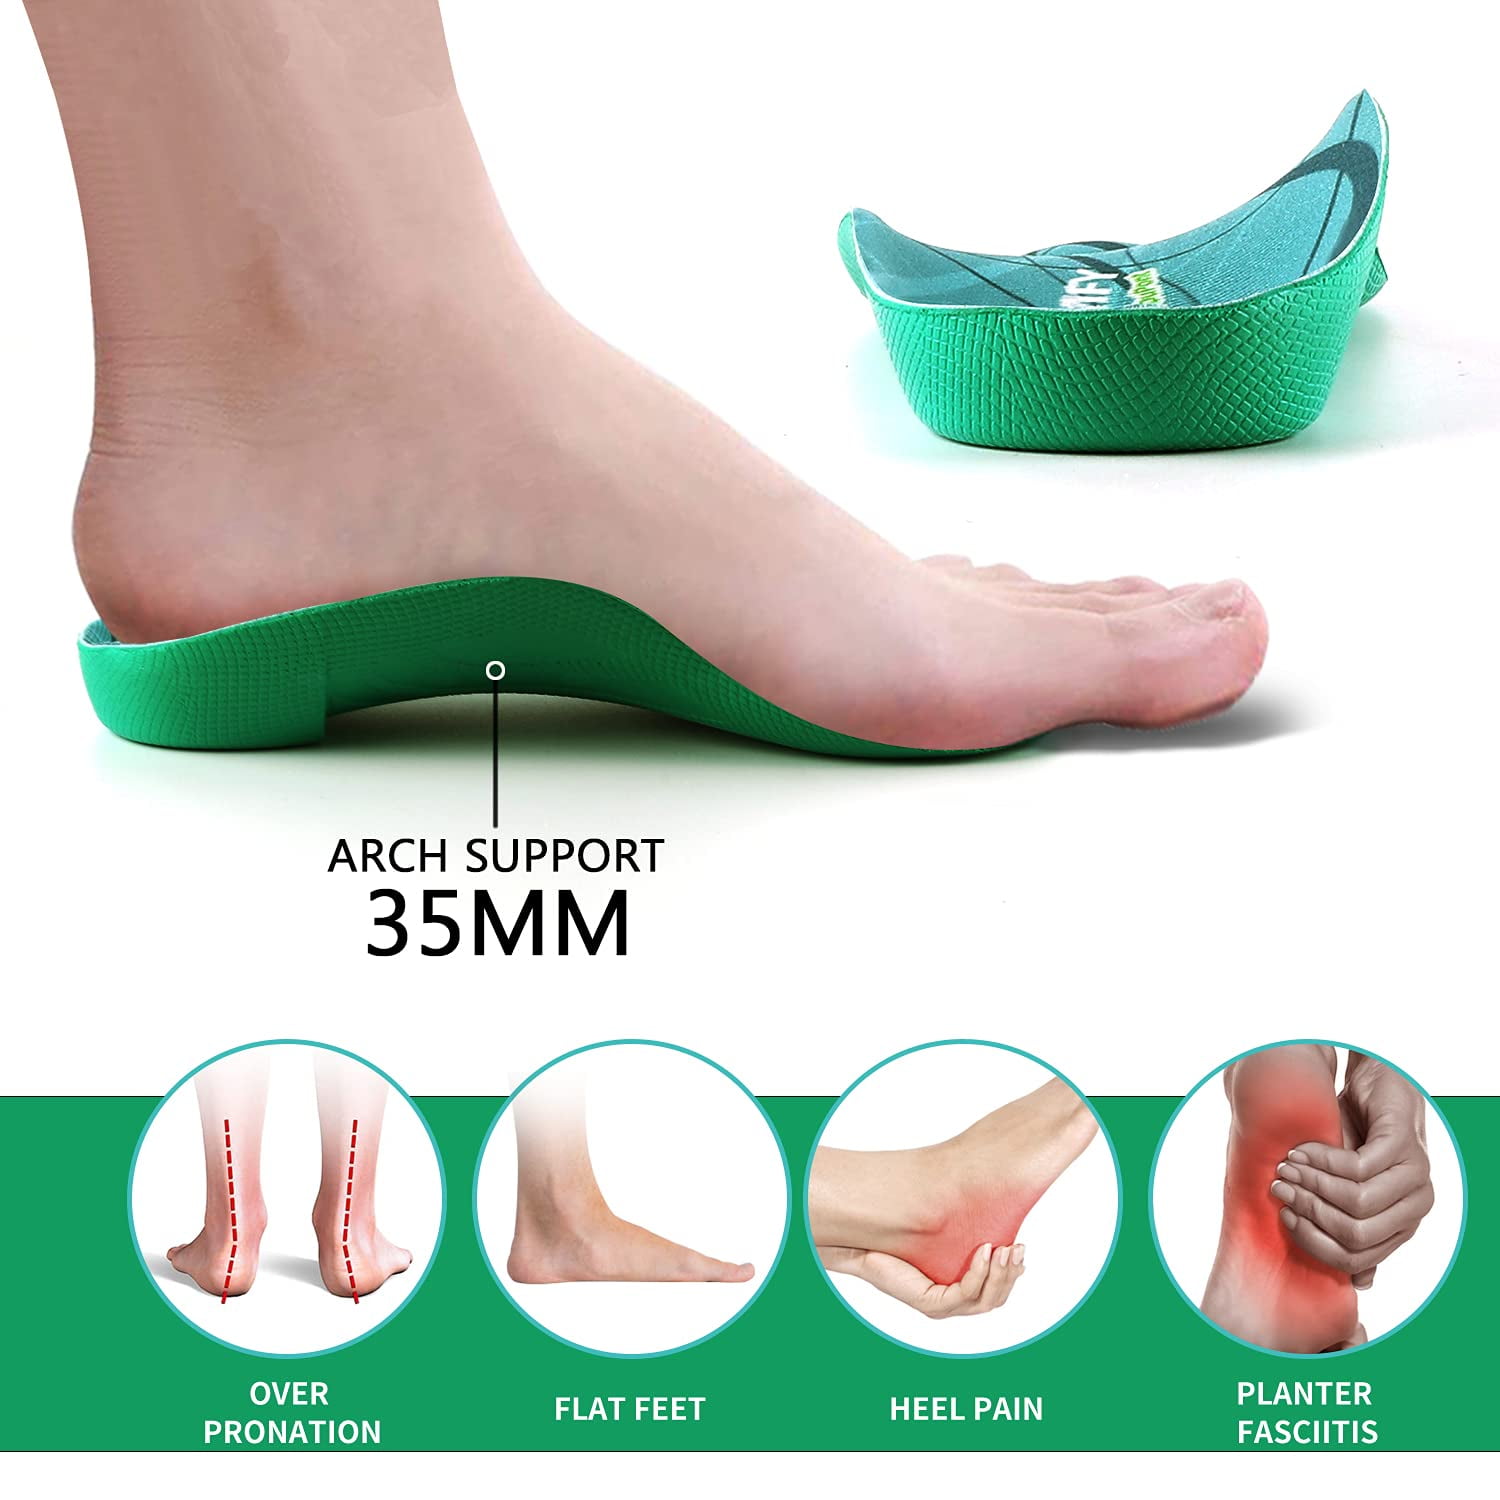 BAC 3/4 Orthotic Feet Insoles Arch Supports Inserts Relieve Plantar  Fasciitis, Flat Fleet, High Arch, Foot Pain, Overpronation, Lower Back Pain  - Mens